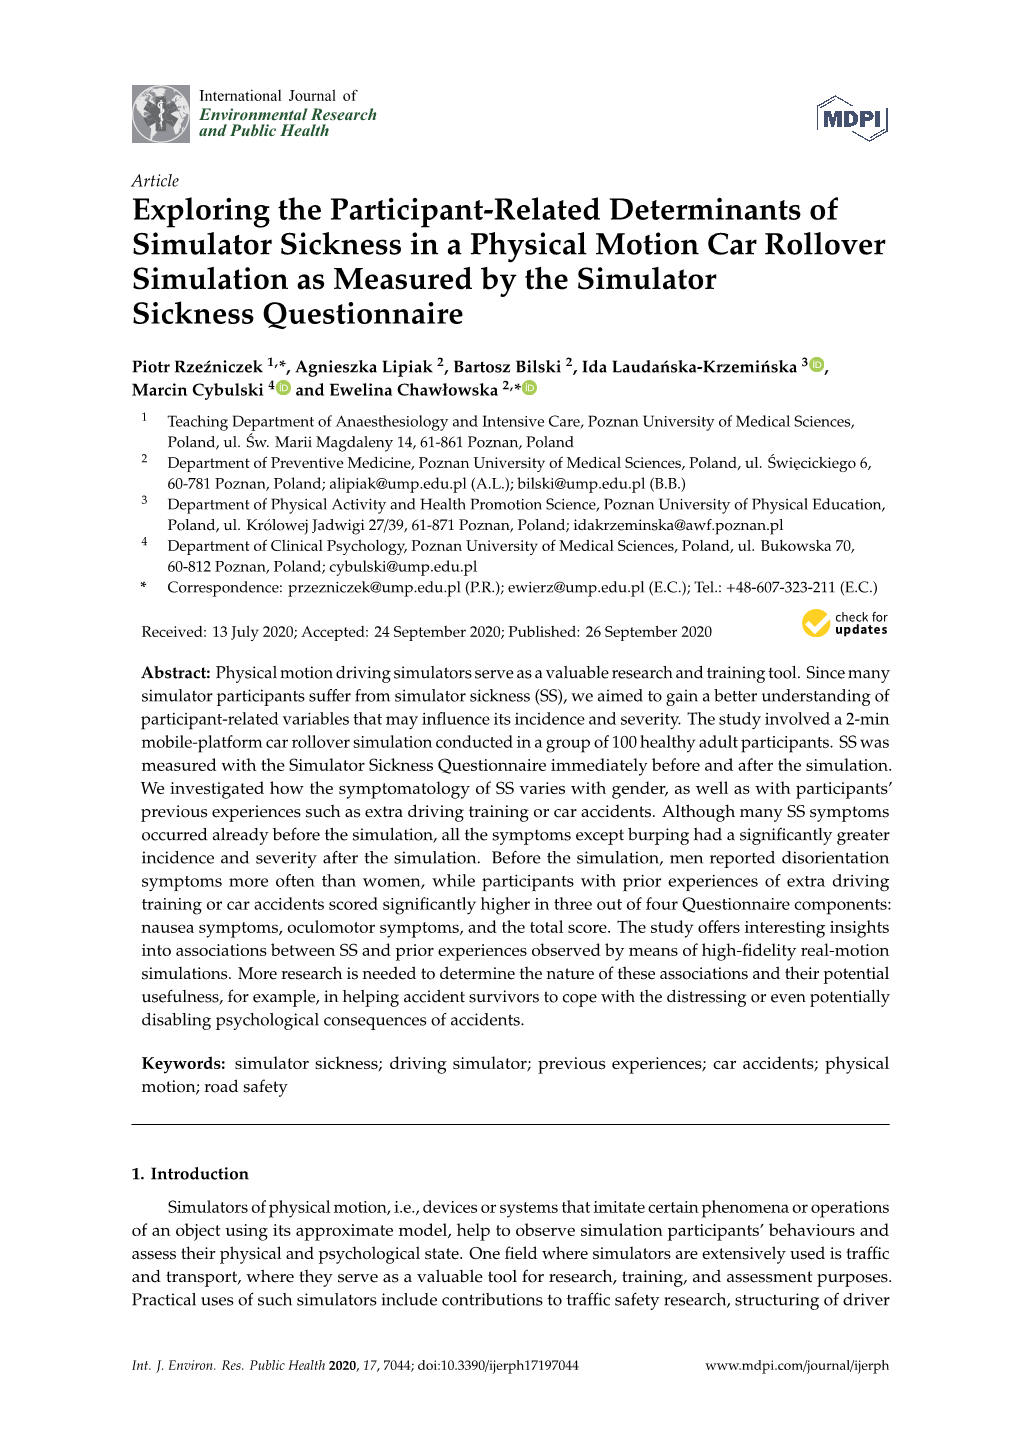 Exploring the Participant-Related Determinants of Simulator Sickness in a Physical Motion Car Rollover Simulation As Measured by the Simulator Sickness Questionnaire